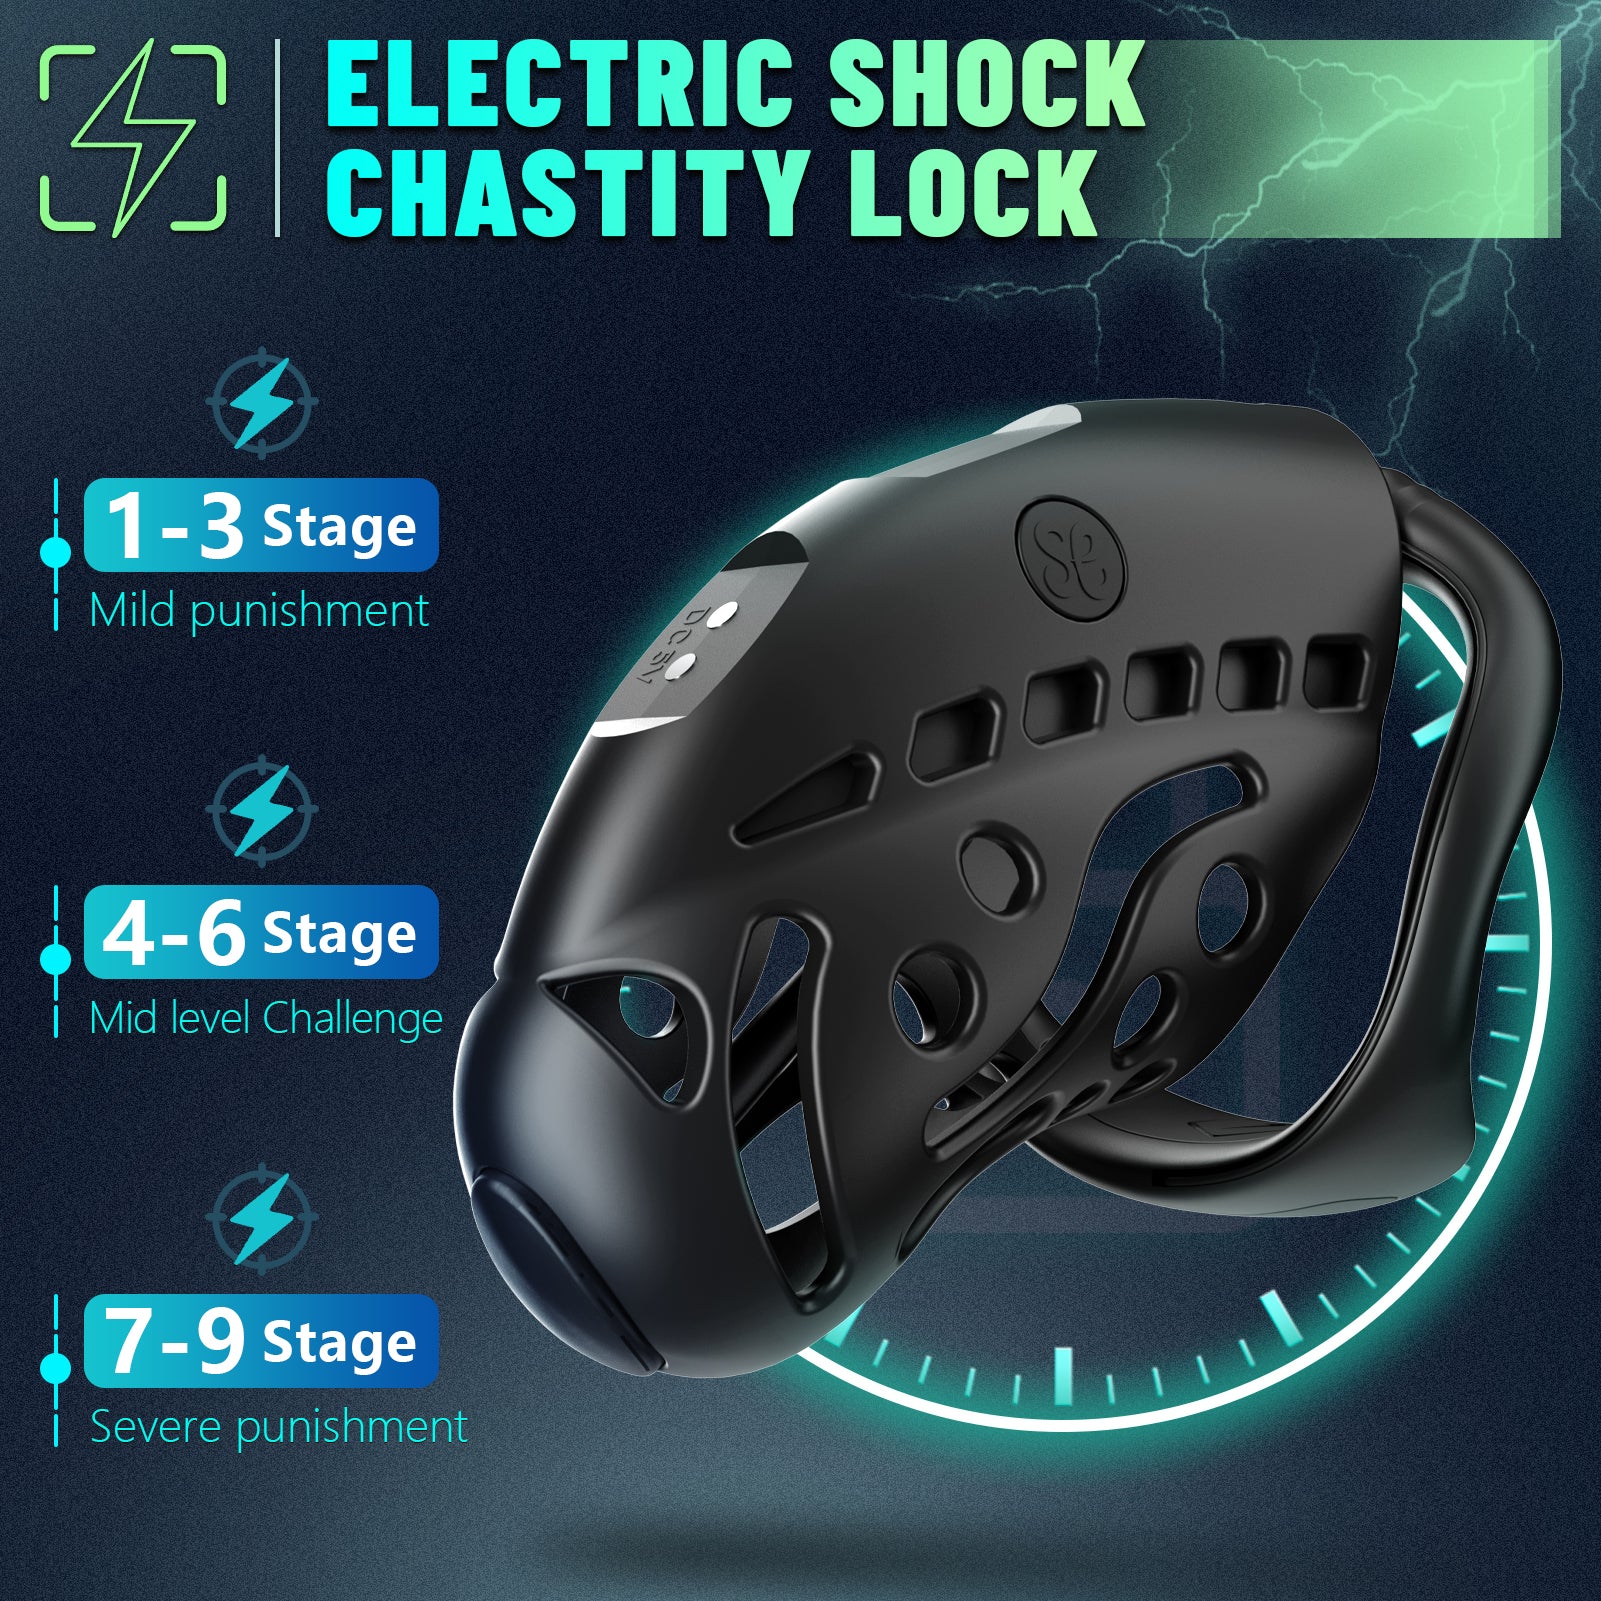 SEVANDA Remote Control Electric Shock Male Cock Cage Chastity Device - 9 e-stim intensities Chastity Cage with 3 Active Rings Adult Sex Toy for Men Penis Exercise | Key and Lock Included